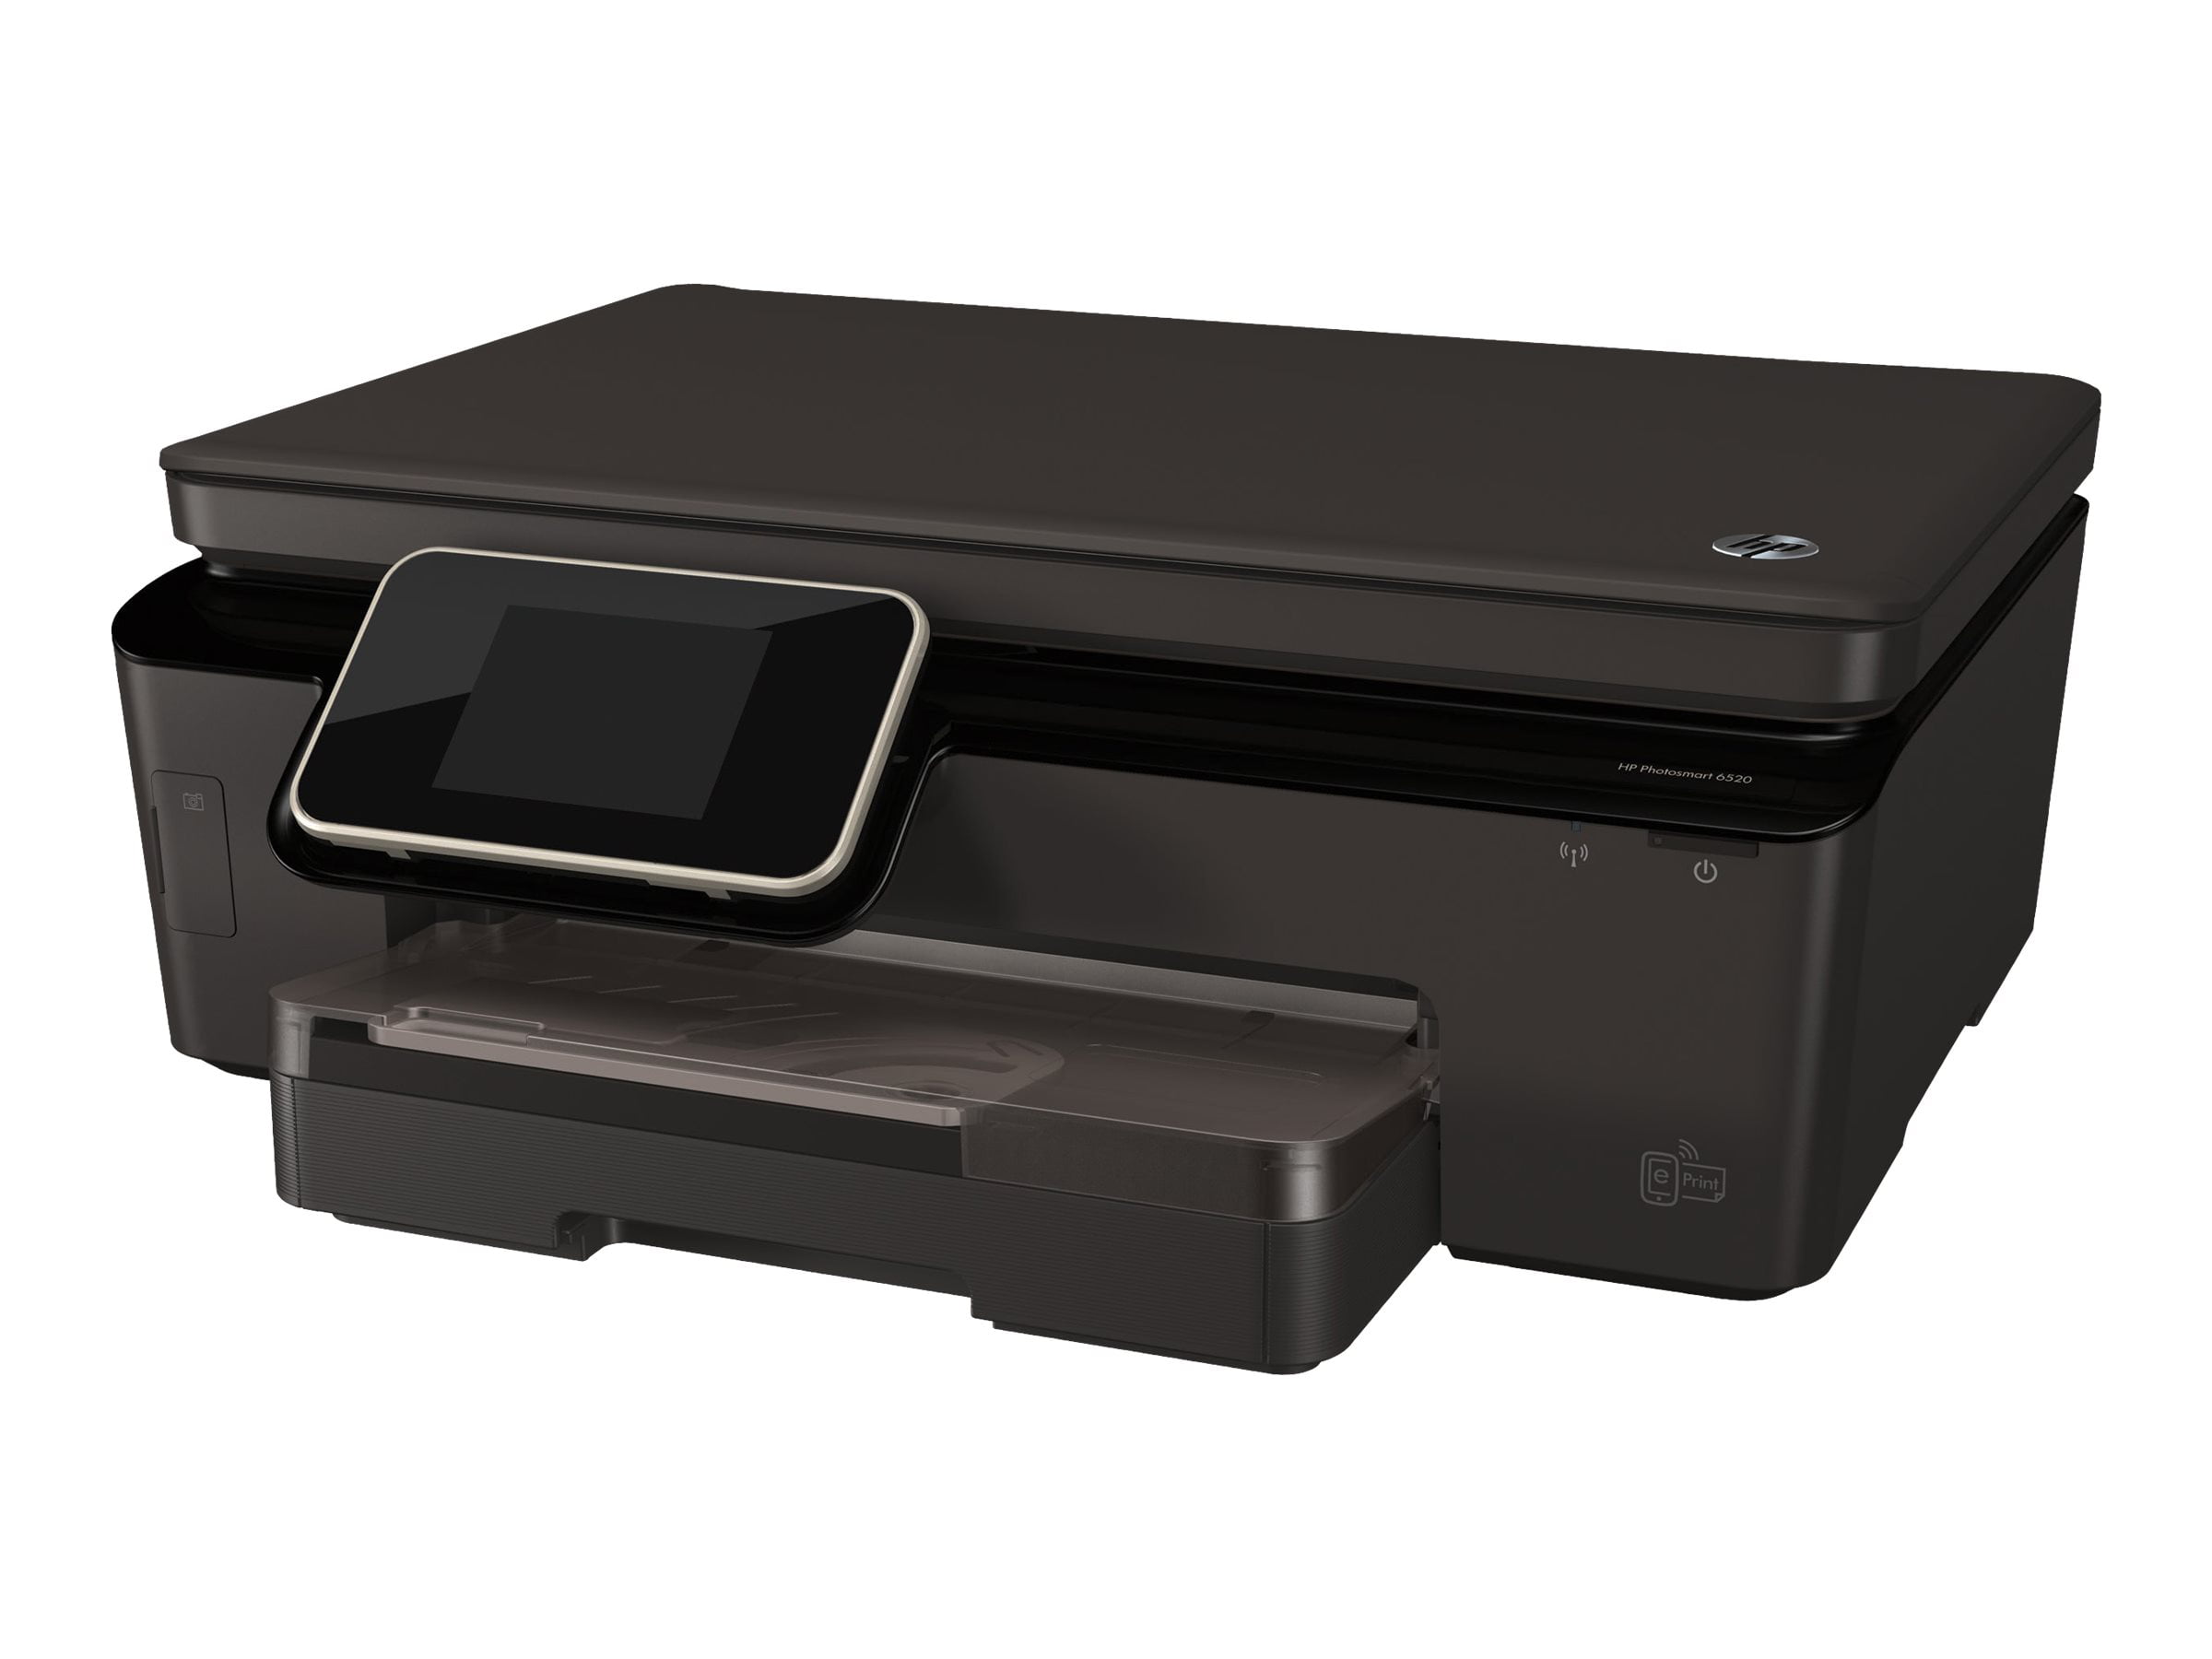 juni tvetydig skat HP Photosmart 6520 e-All-in-One - Multifunction printer - color - ink-jet -  8.5 in x 11.7 in (original) - A4/Legal (media) - up to 6.5 ppm (copying) -  up to 12 ppm (